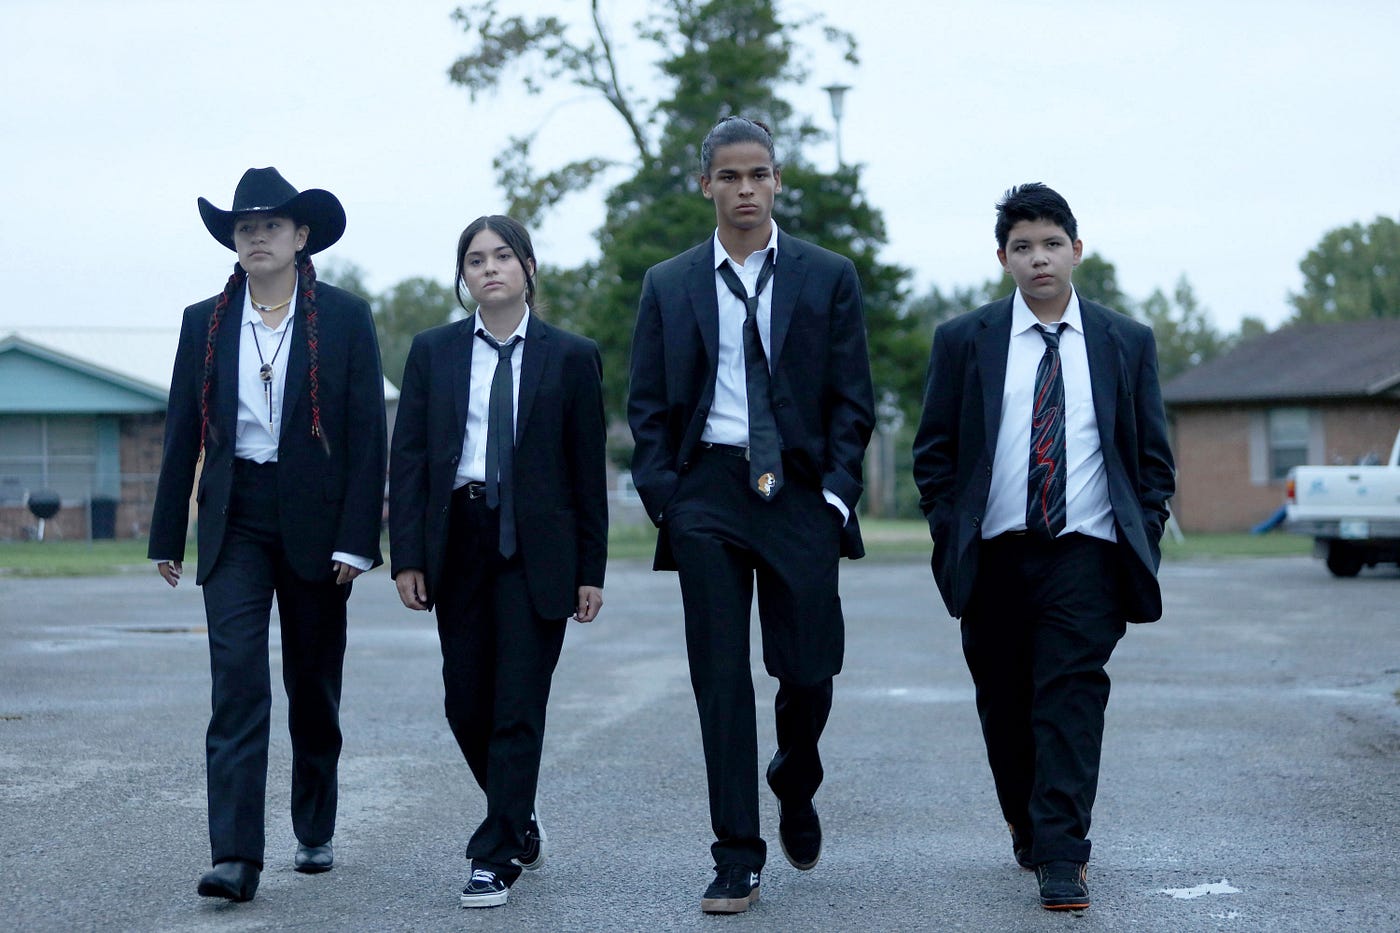 The titular reservation dogs, from left to right Paulina Alexis as Willie Jack, Kawennáhere Devery Jacobs as Elora, D’Pharaoh Woon-A-Tai as Bear, and Lane Factor as Cheese, walk along the street towards the camera in black suits in the manner of Reservoir Dogs from the 1992 Quentin Tarantino film.